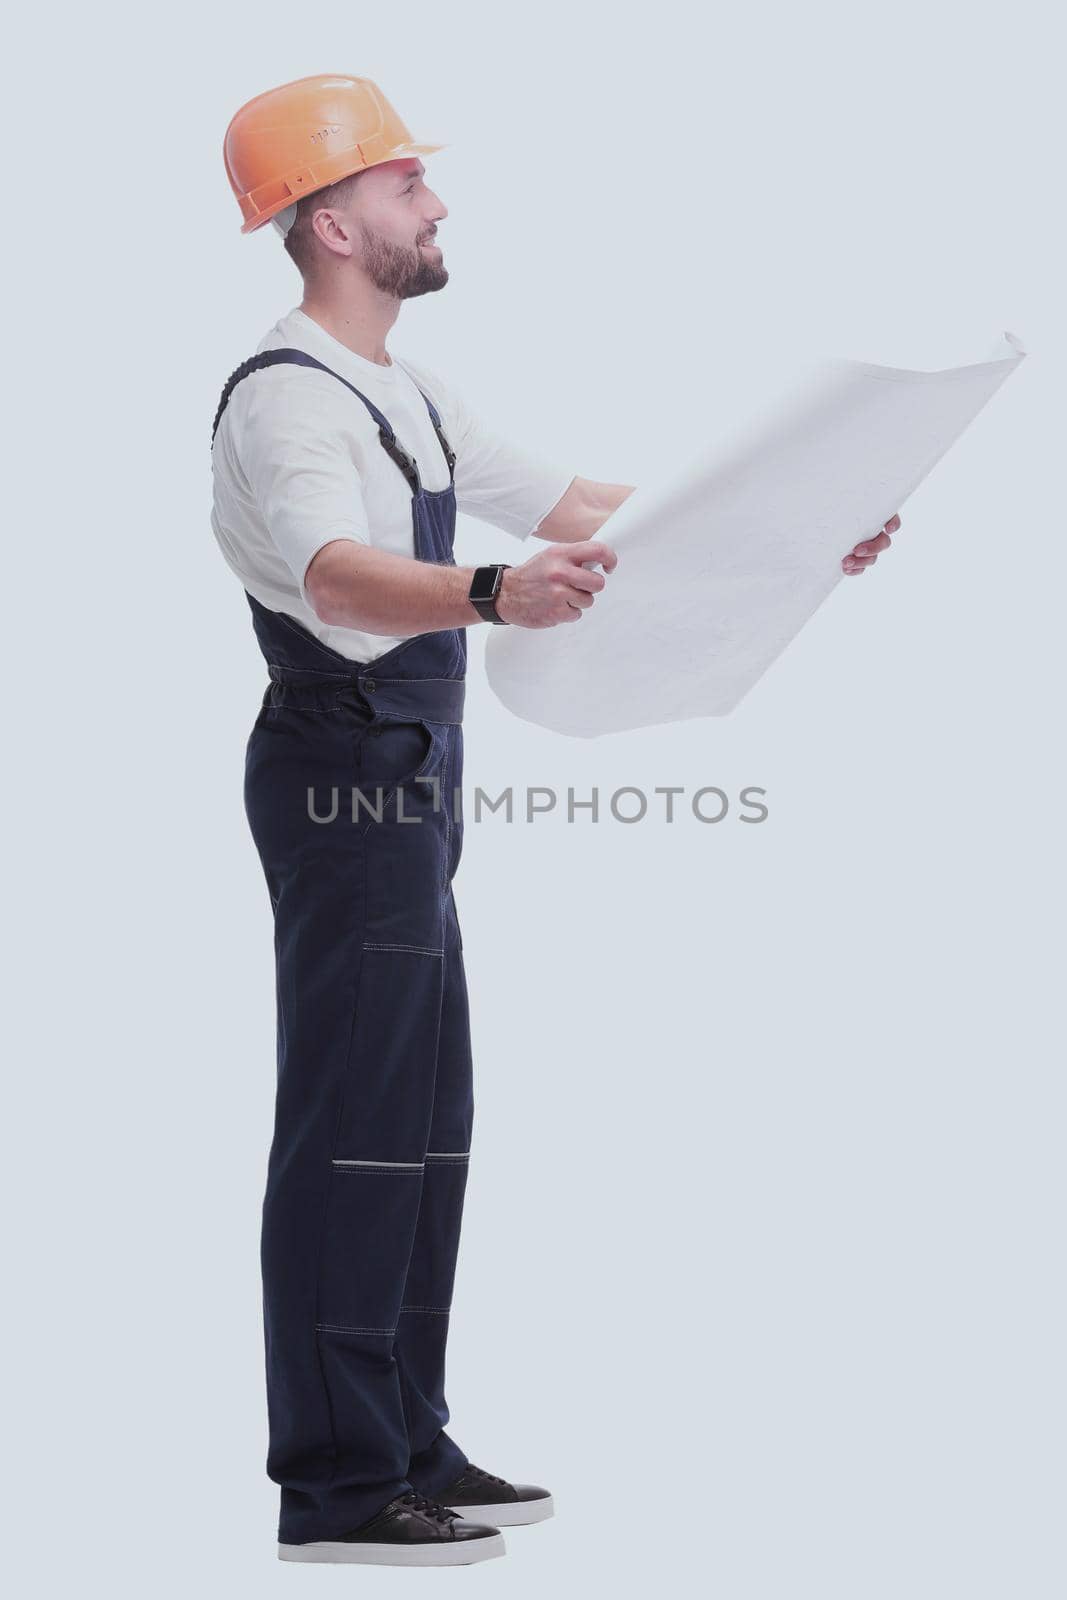 in full growth. competent foreman Builder looking at drawings. isolated on white background